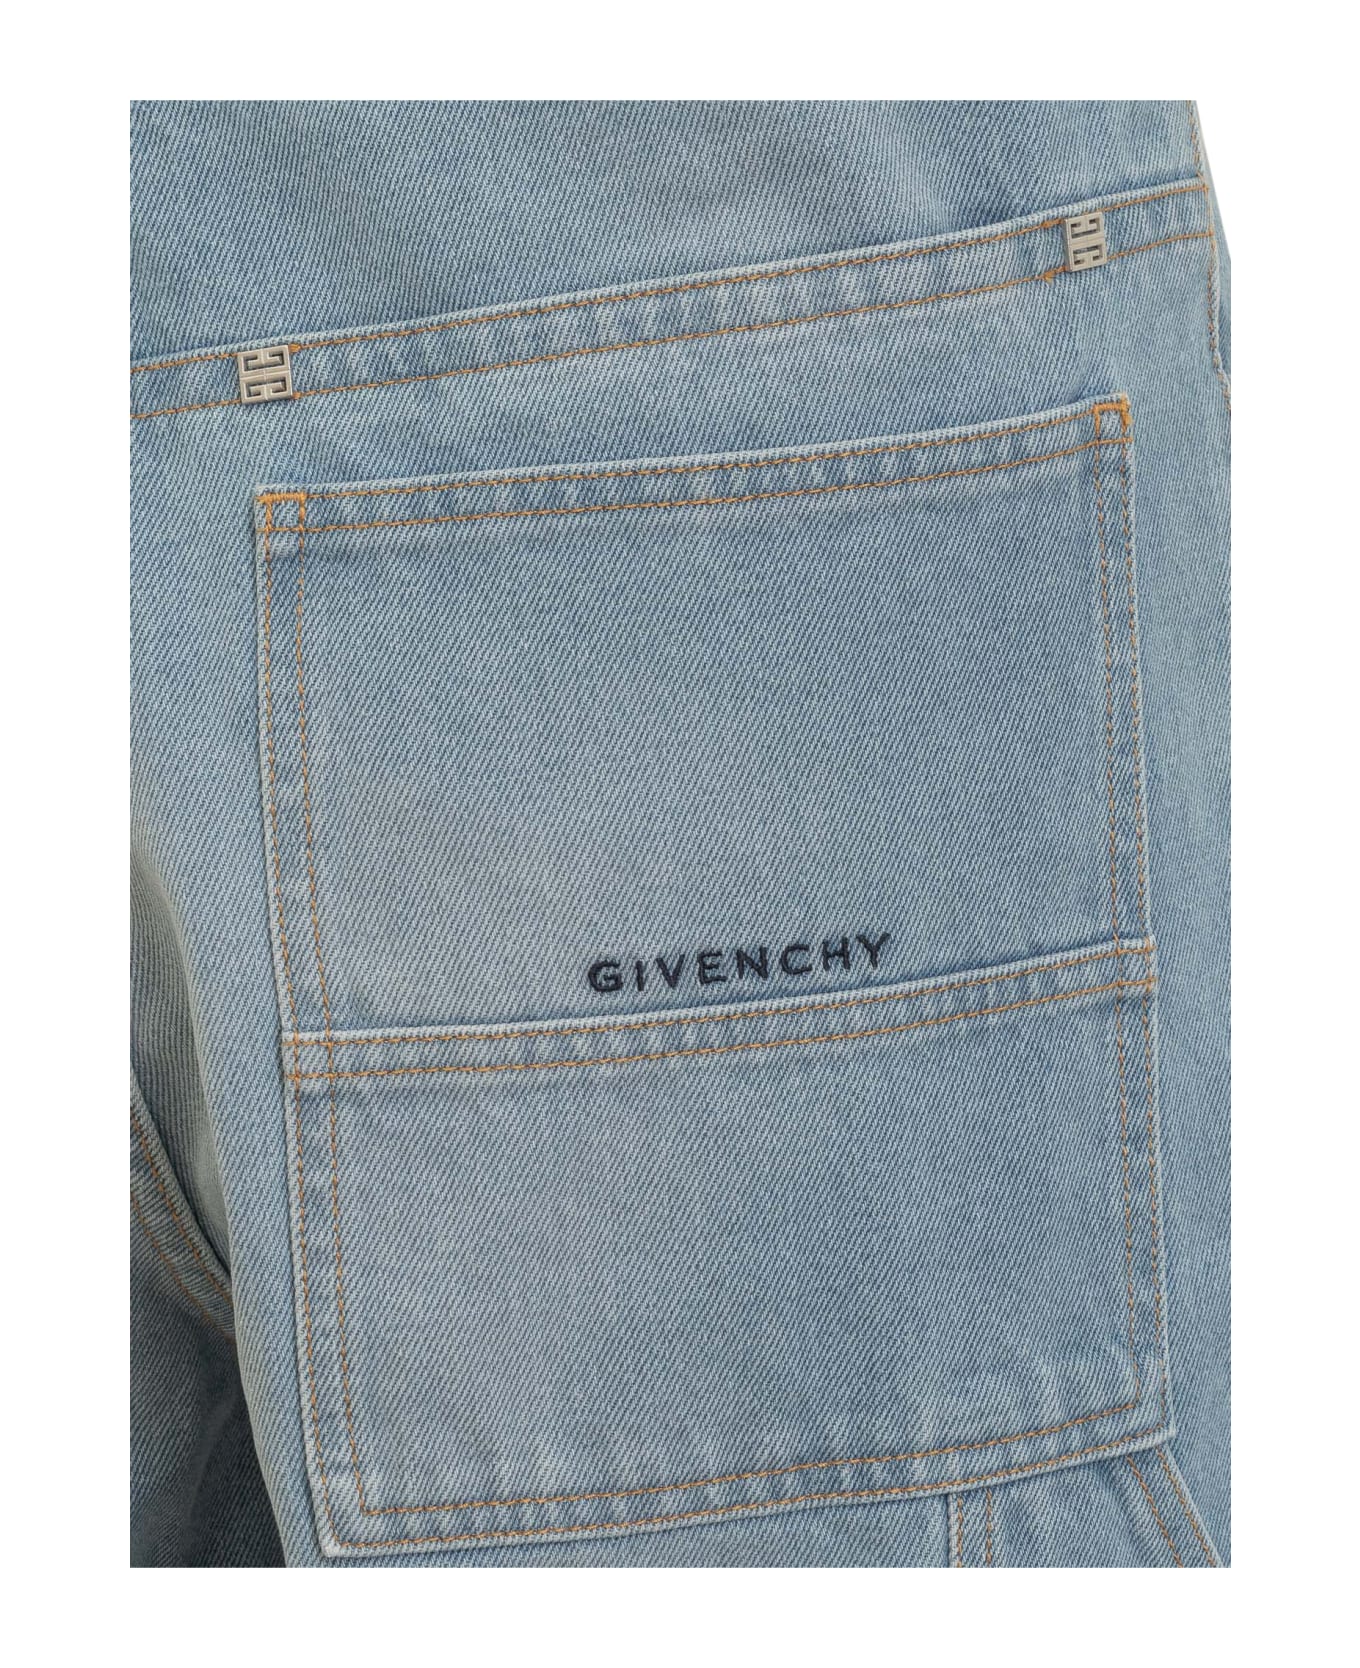 Givenchy Jeans - Blue